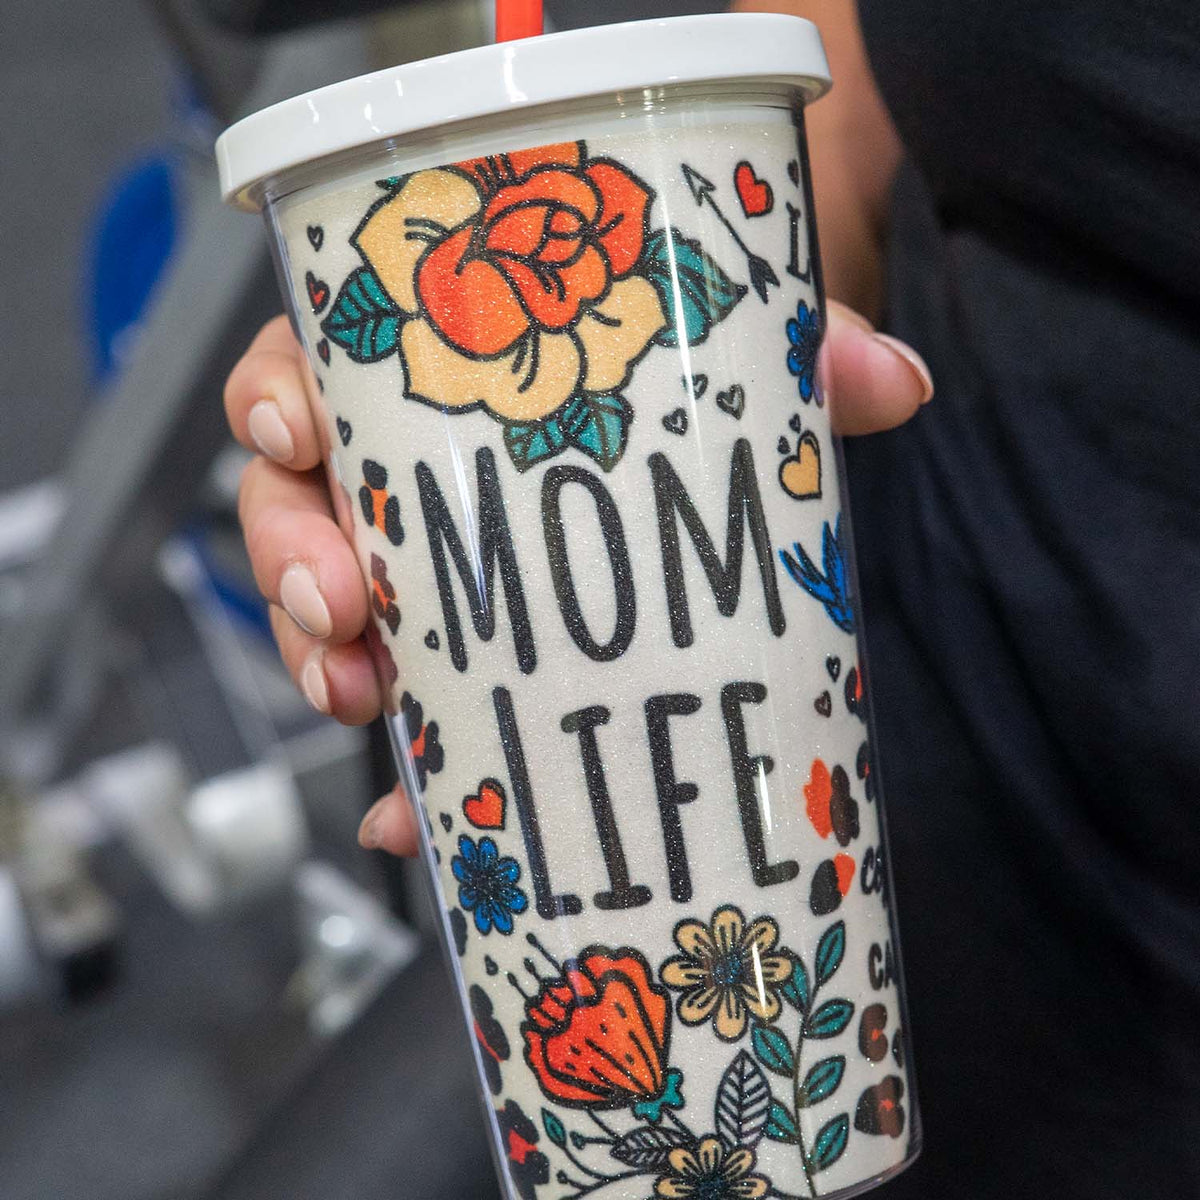 Mom Life Is The Best Life - Tumbler Cup – SoulfulWear